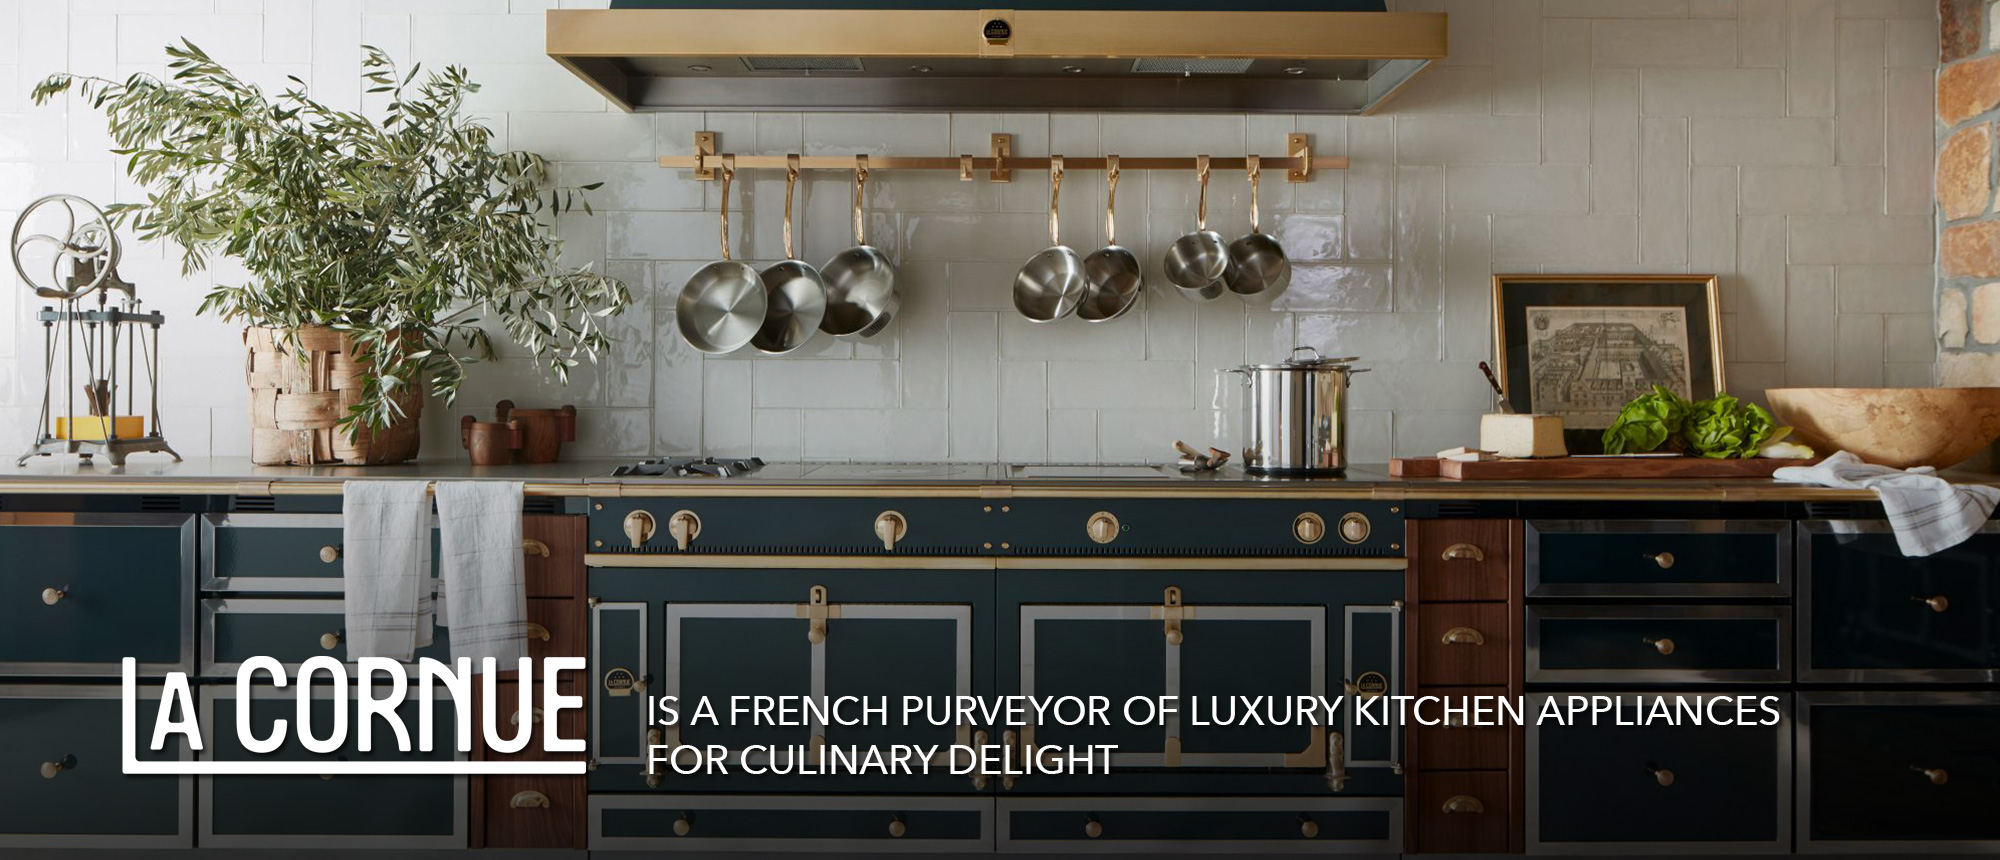 LA CORNUE IS A FRENCH PURVEYOR OF LUXURY KITCHEN APPLIANCES FOR CULINARY DELIGHT